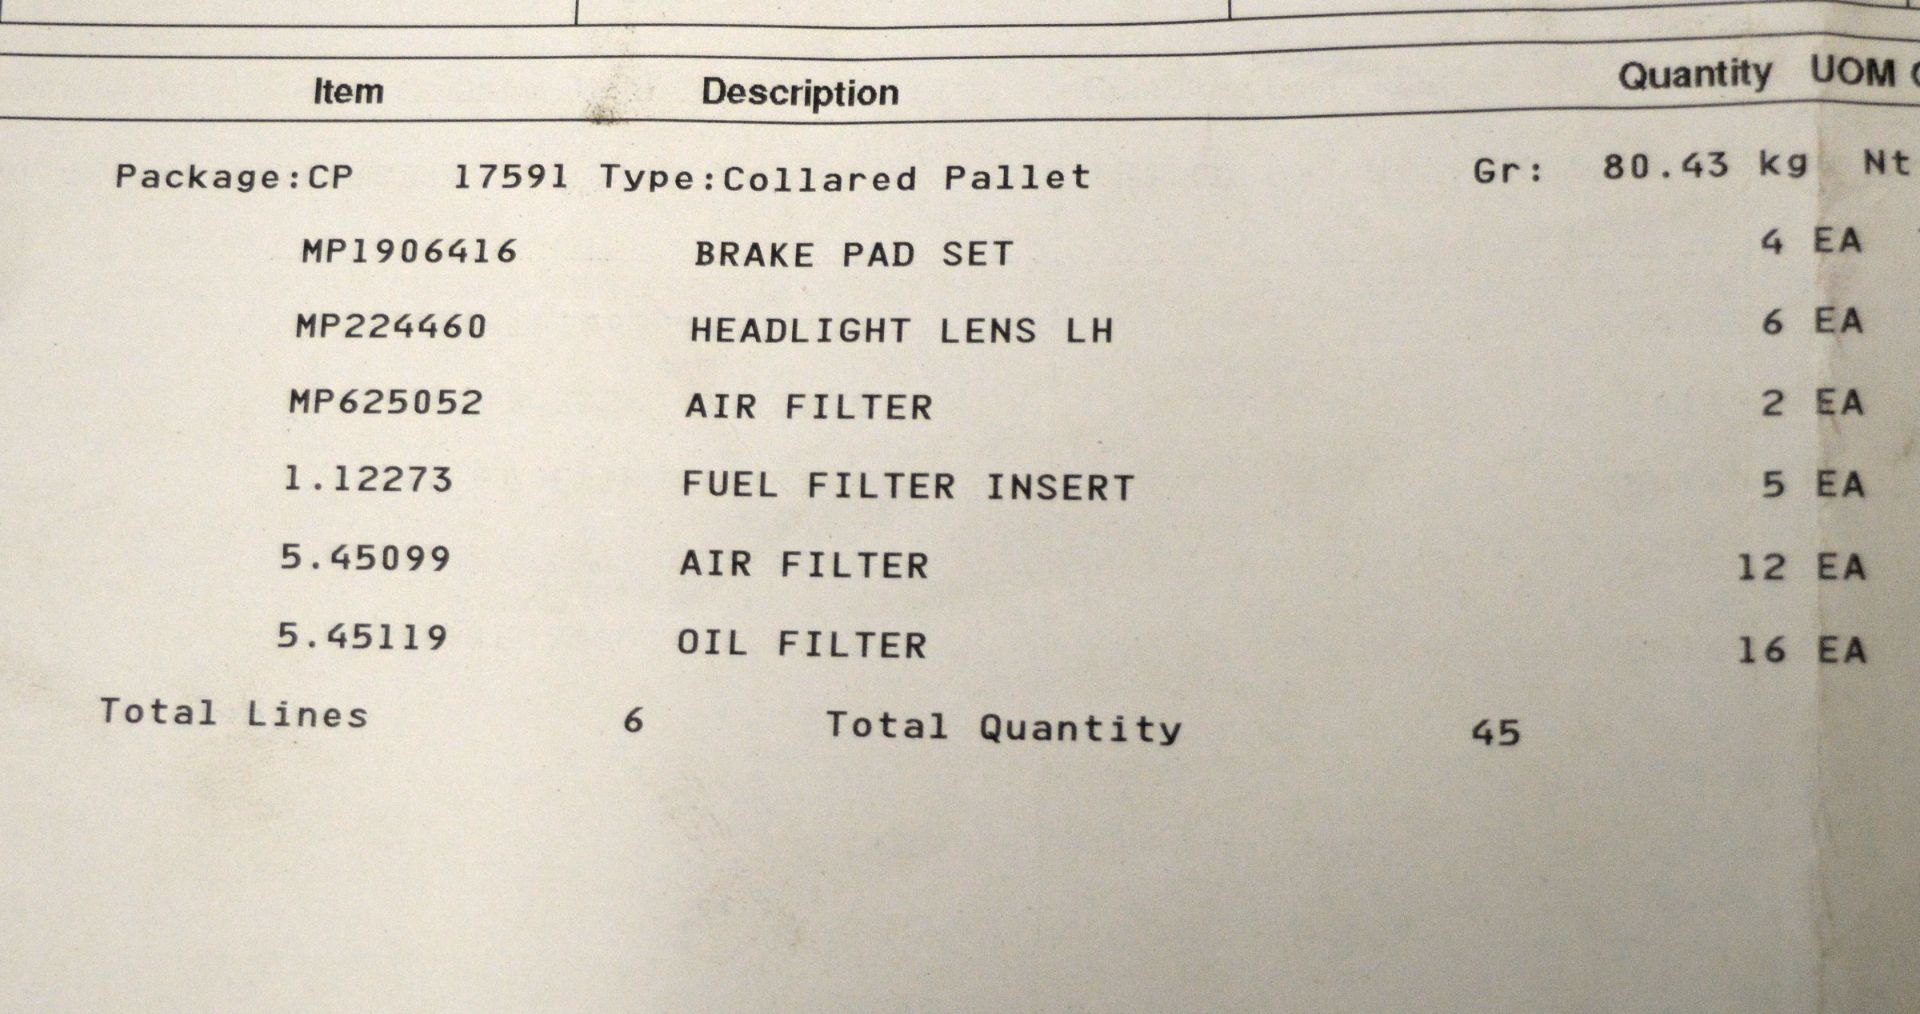 Vehicle parts - brake pad sets, air & oil filters, fuel filter inserts, - see pictures - Image 7 of 7